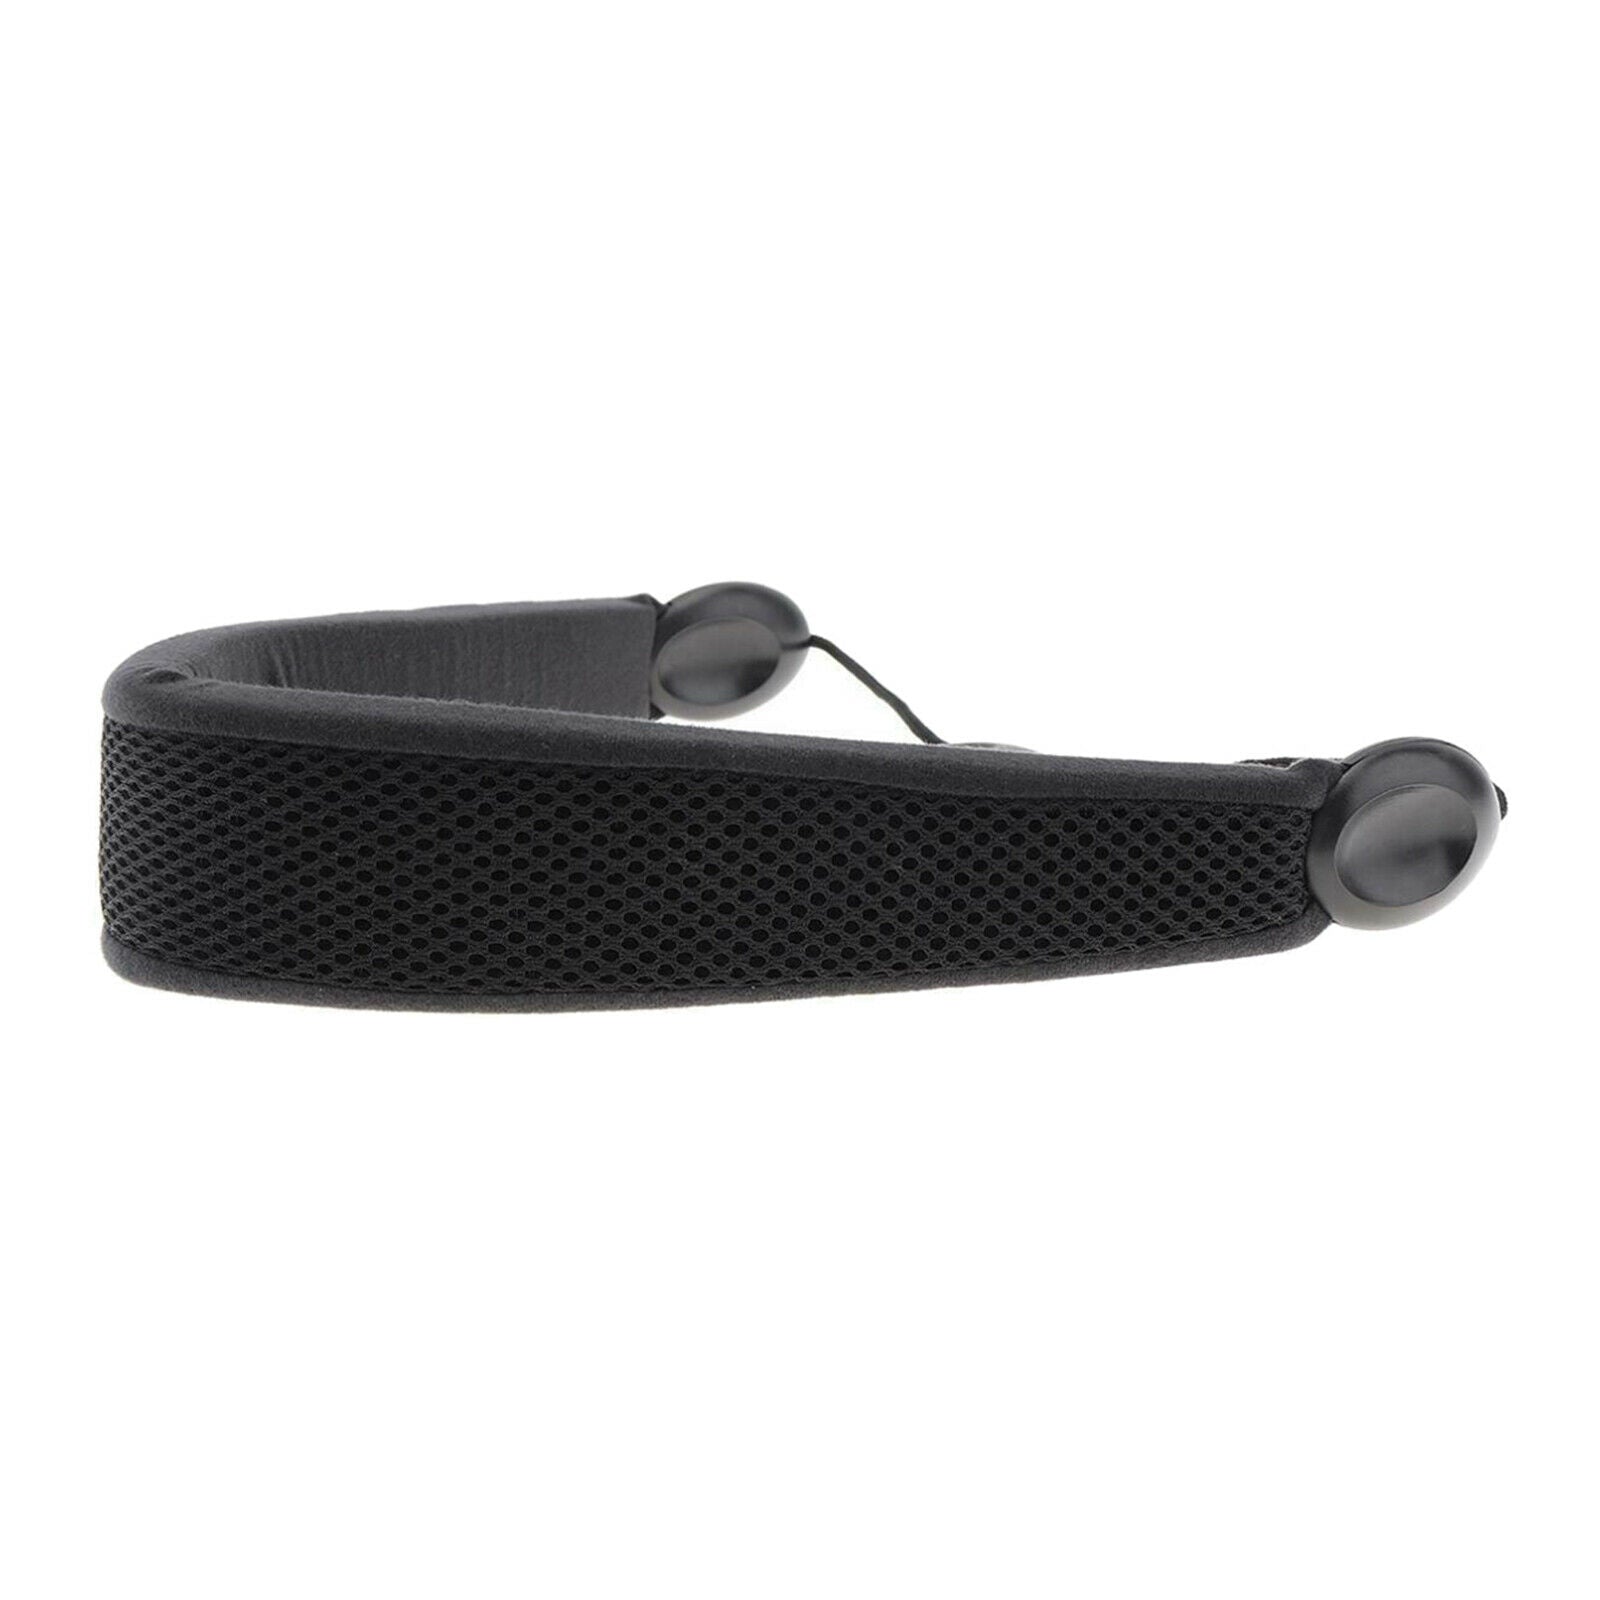 Padded Saxophone Neck Strap-Comfortable Sax Strap Tie with Breathable, Washable,